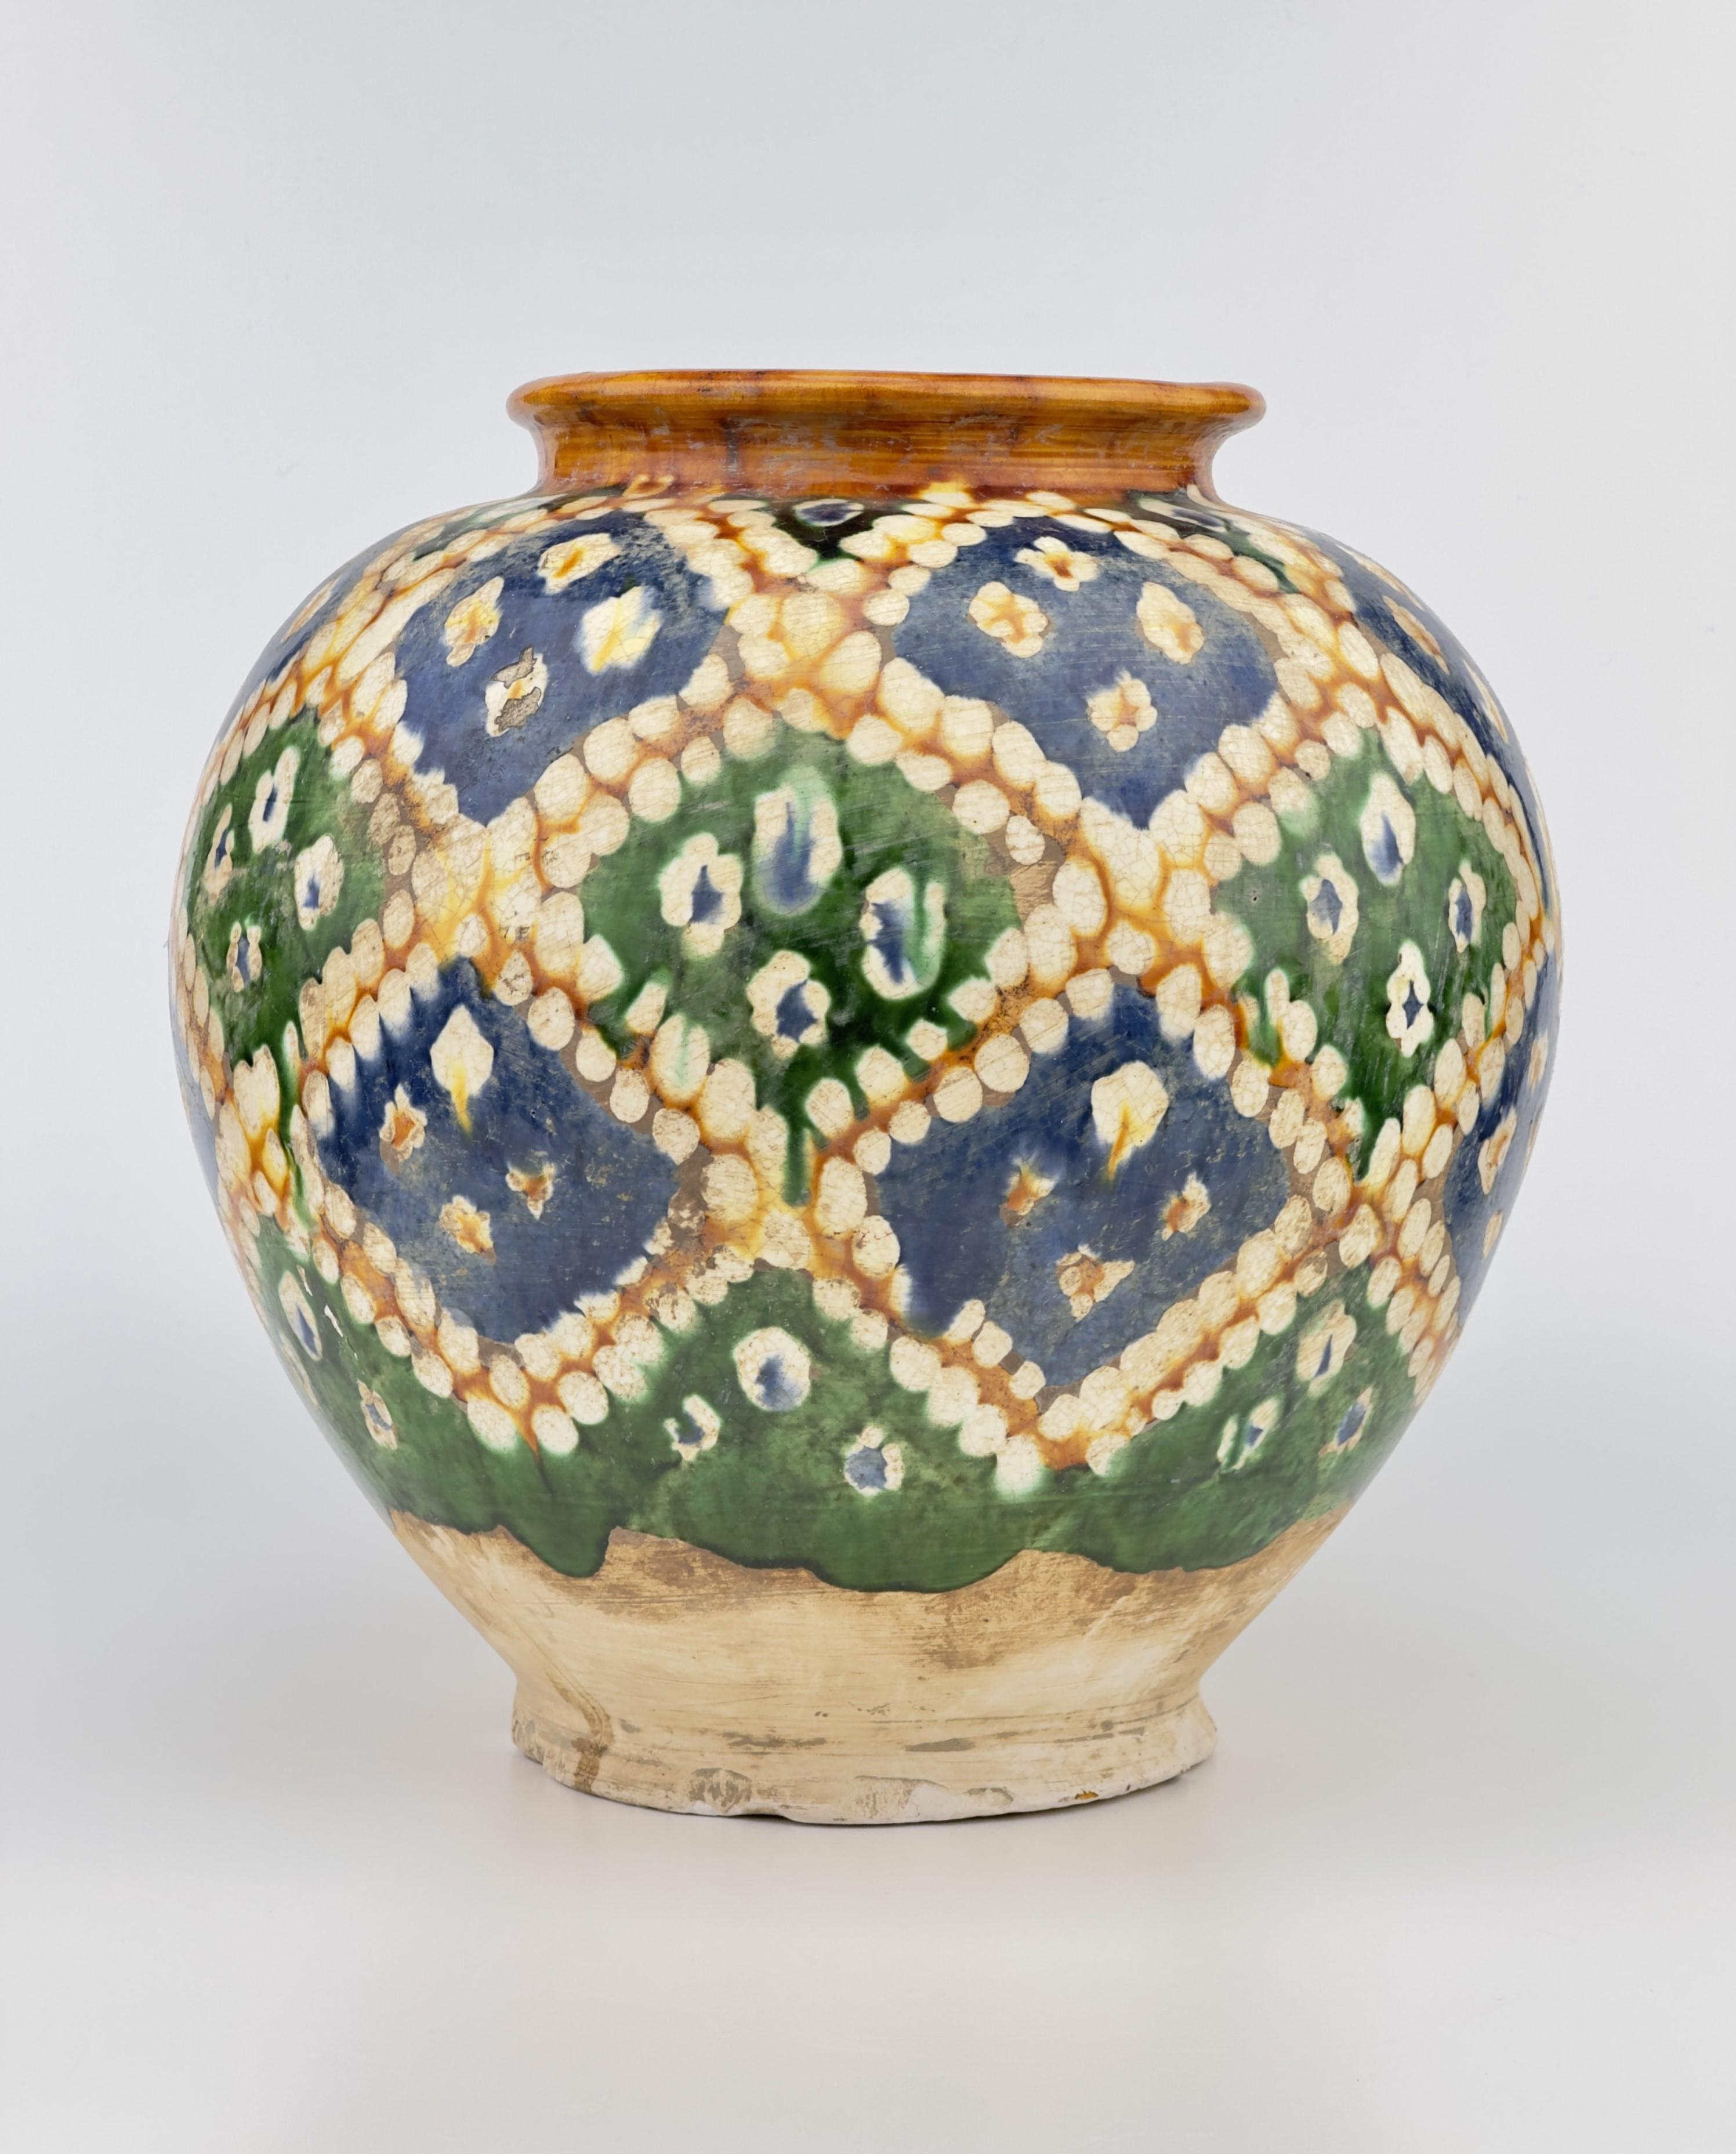 The jar is of globular shape and is decorated to the body with a geometric design band of lozenge-shaped motifs in blue, green, ochre and cream below a plain ochre everted mouth rim, all above an unglazed base.

The rainbow-like colors on this